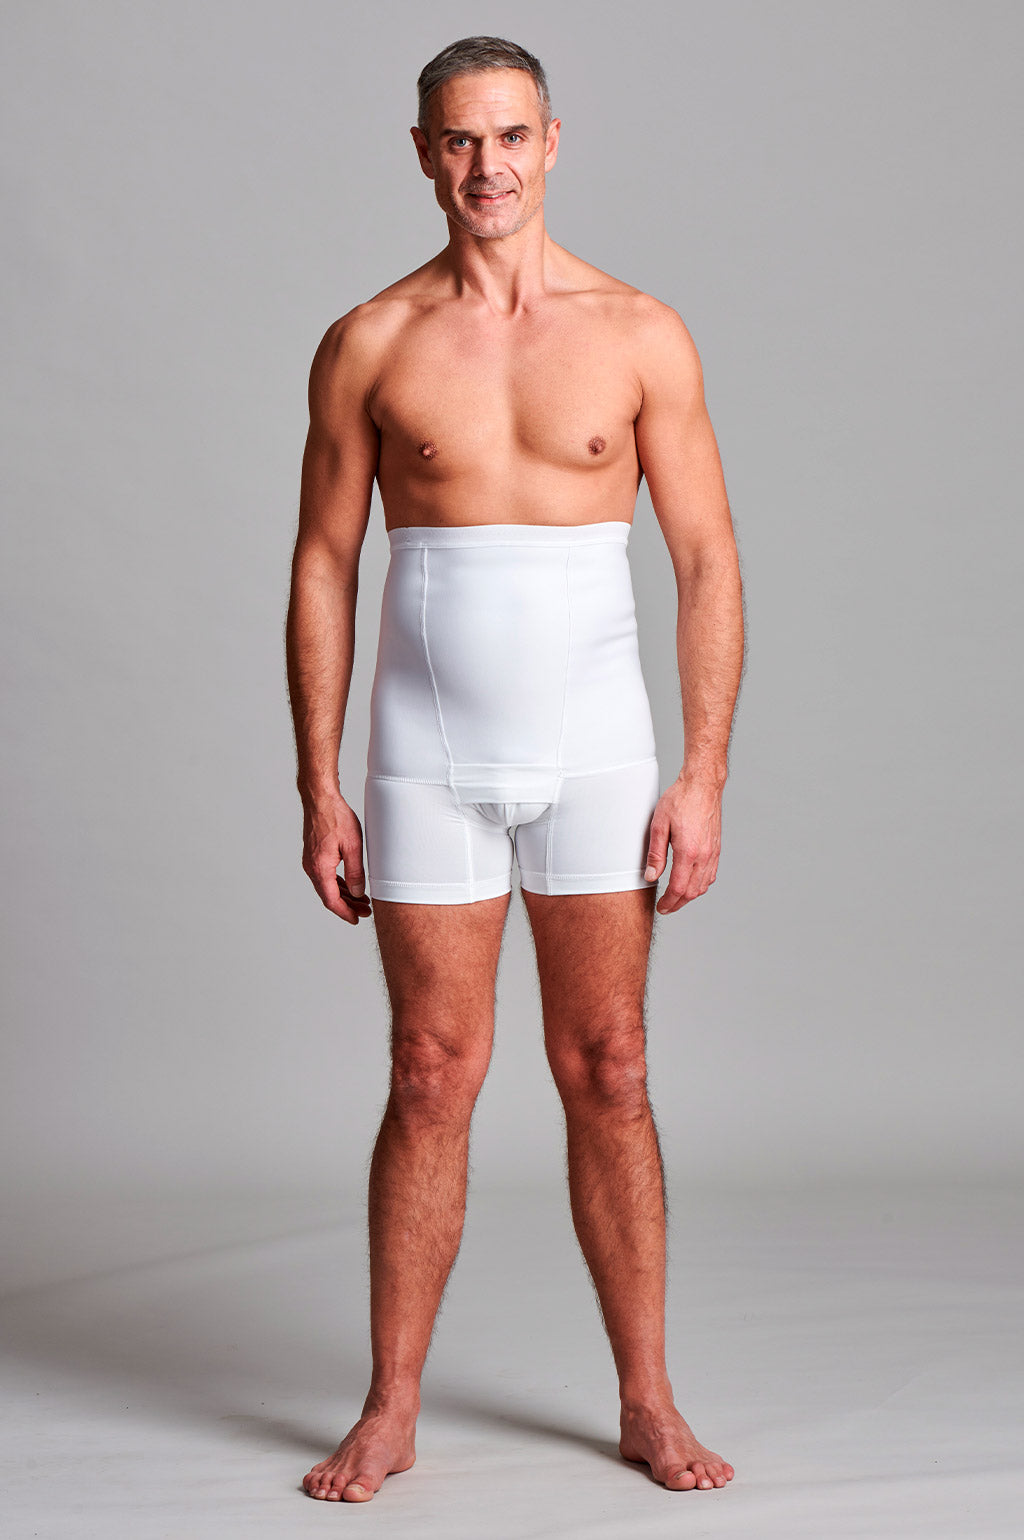 Underwear Support for Hernias, Hernia Tips